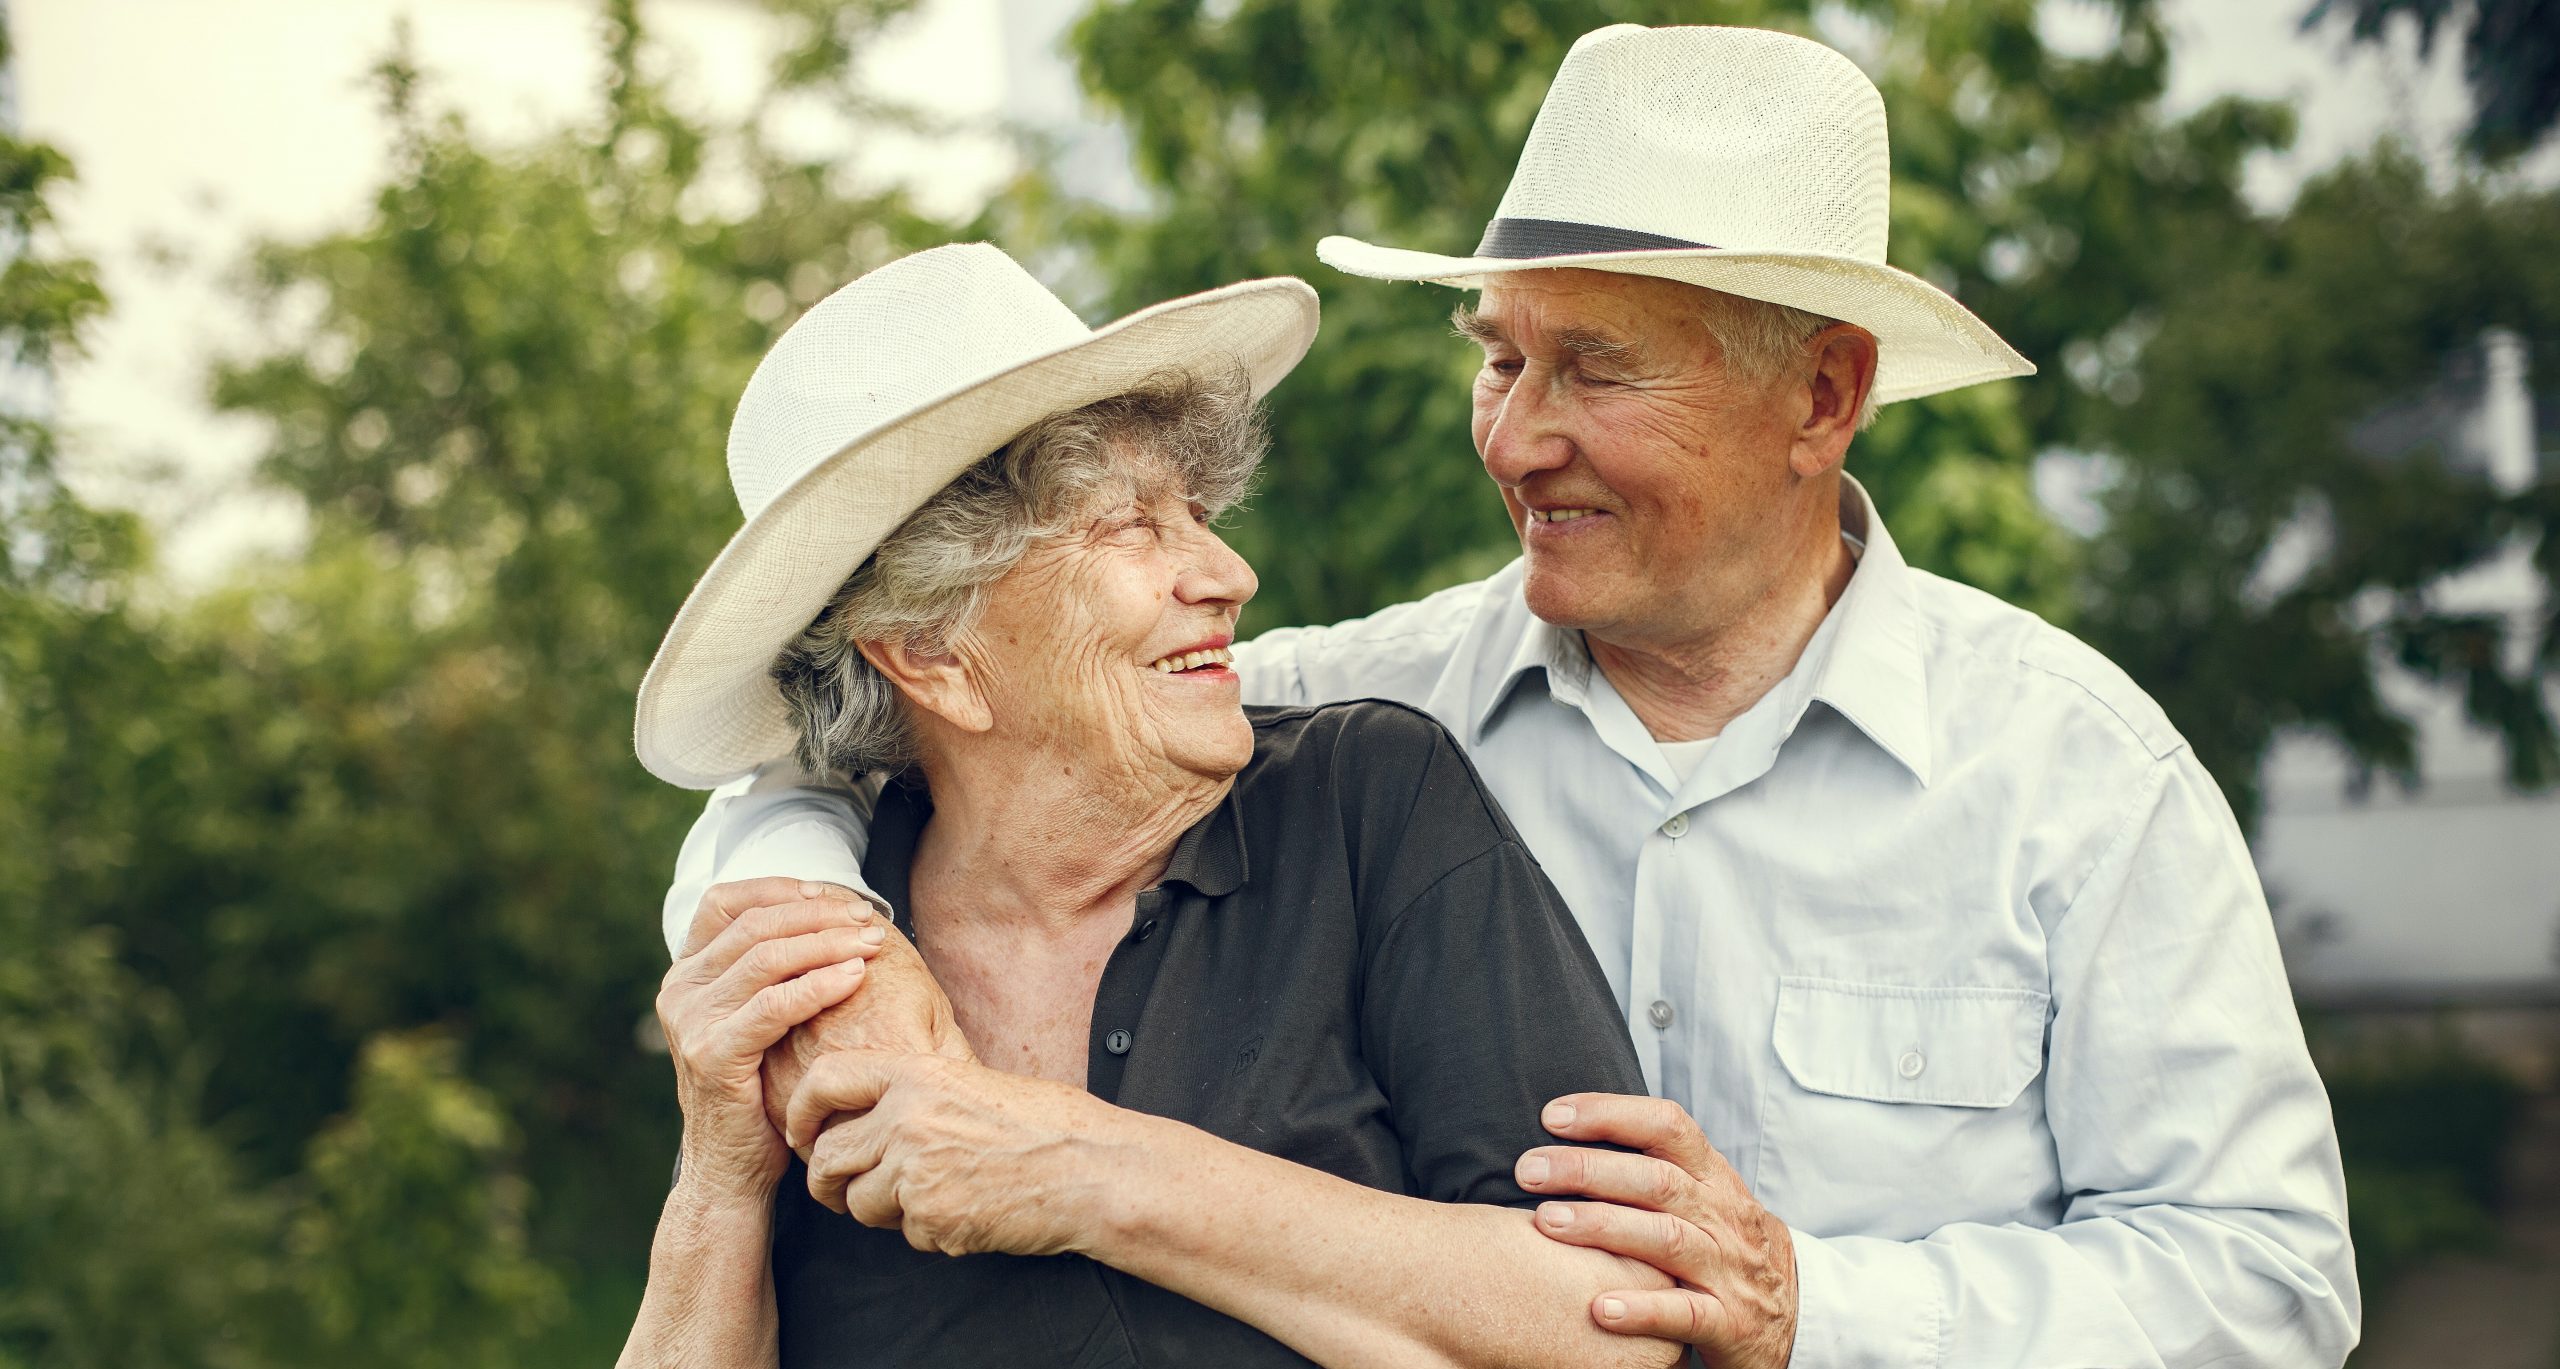 Older couple in hats smiling outside